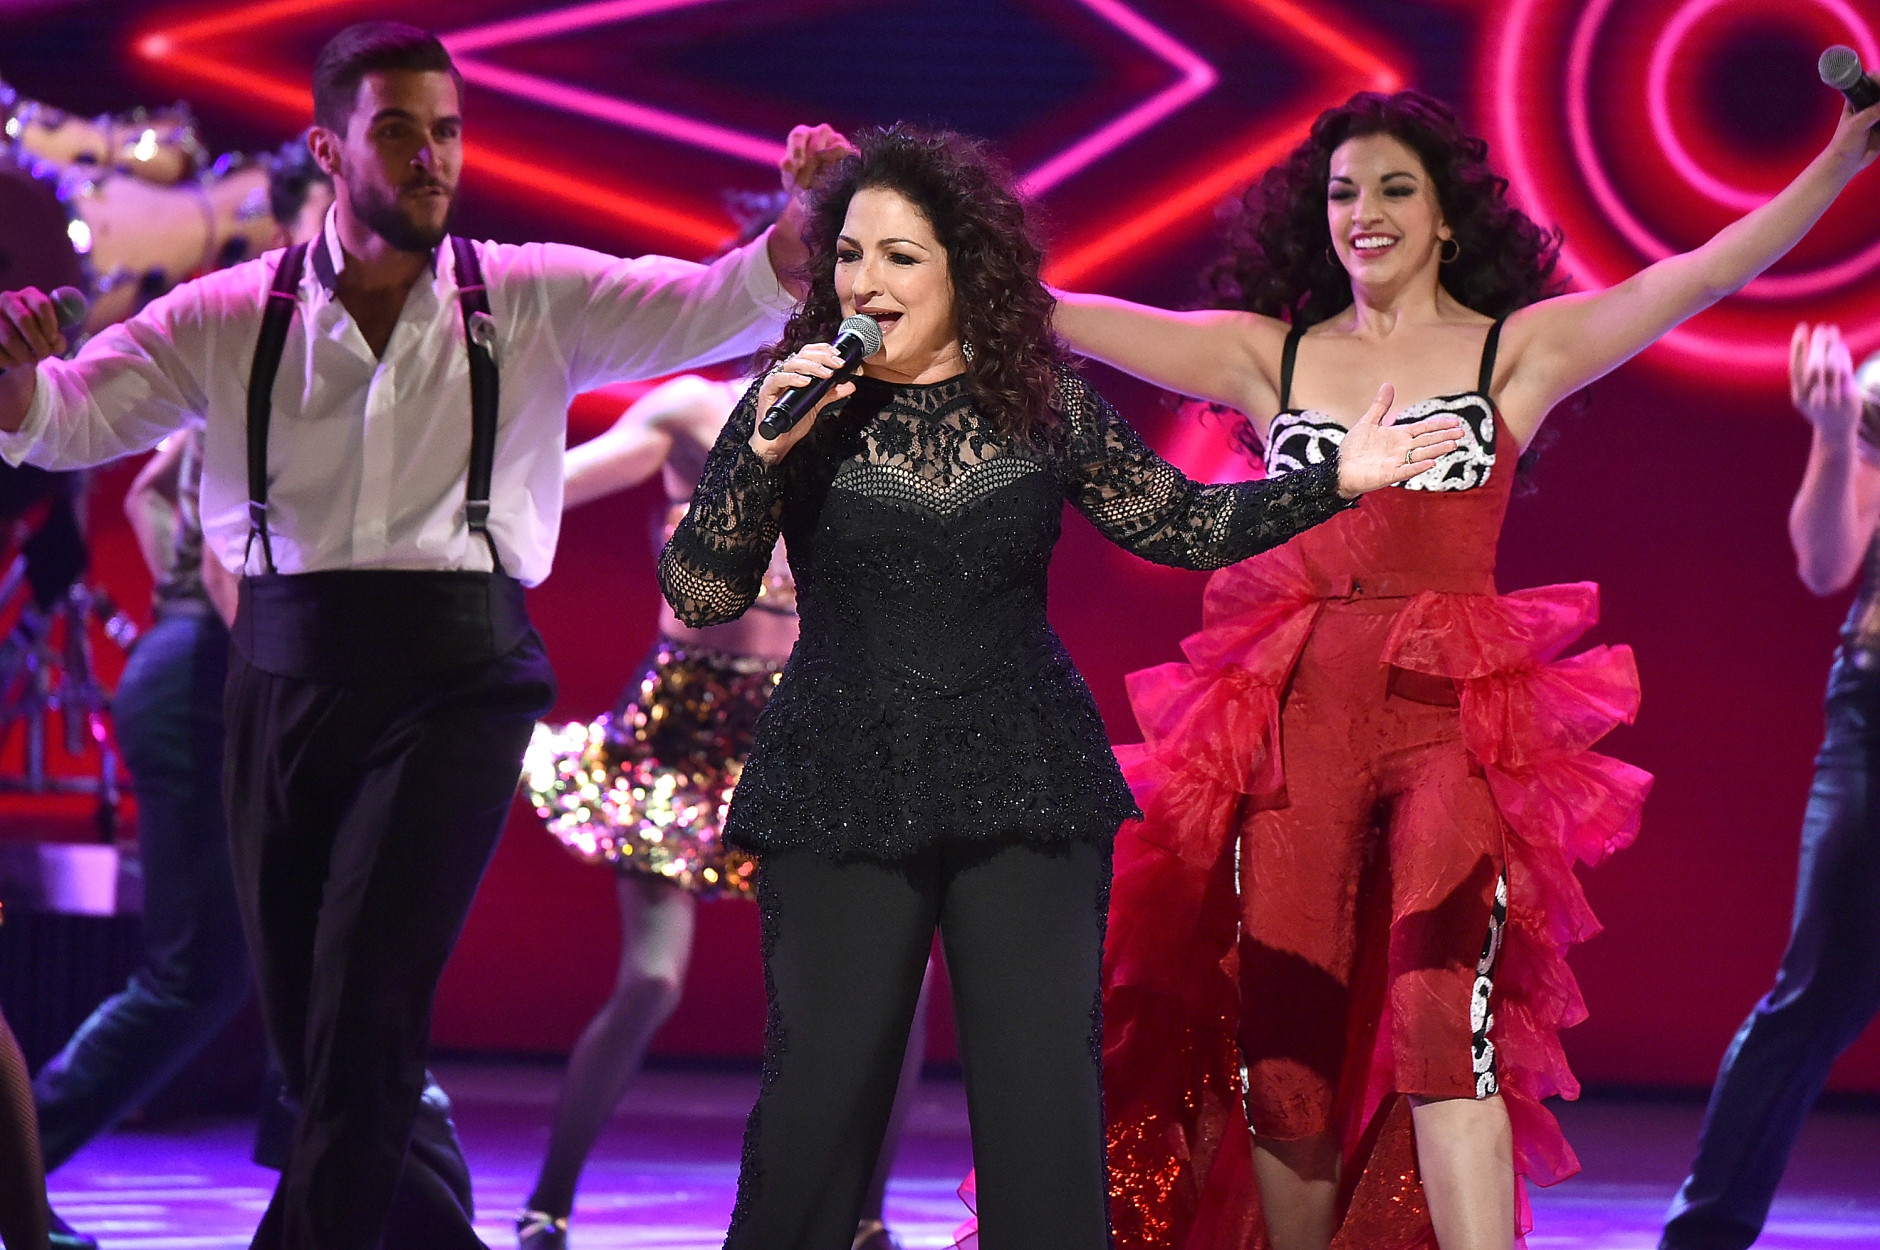 NEW YORK, NY - JUNE 12:  Josh Segarra, Gloria Estefan and Ana Villafane of 'On Your Feet!' perform onstage during the 70th Annual Tony Awards at The Beacon Theatre on June 12, 2016 in New York City.  (Photo by Theo Wargo/Getty Images for Tony Awards Productions)